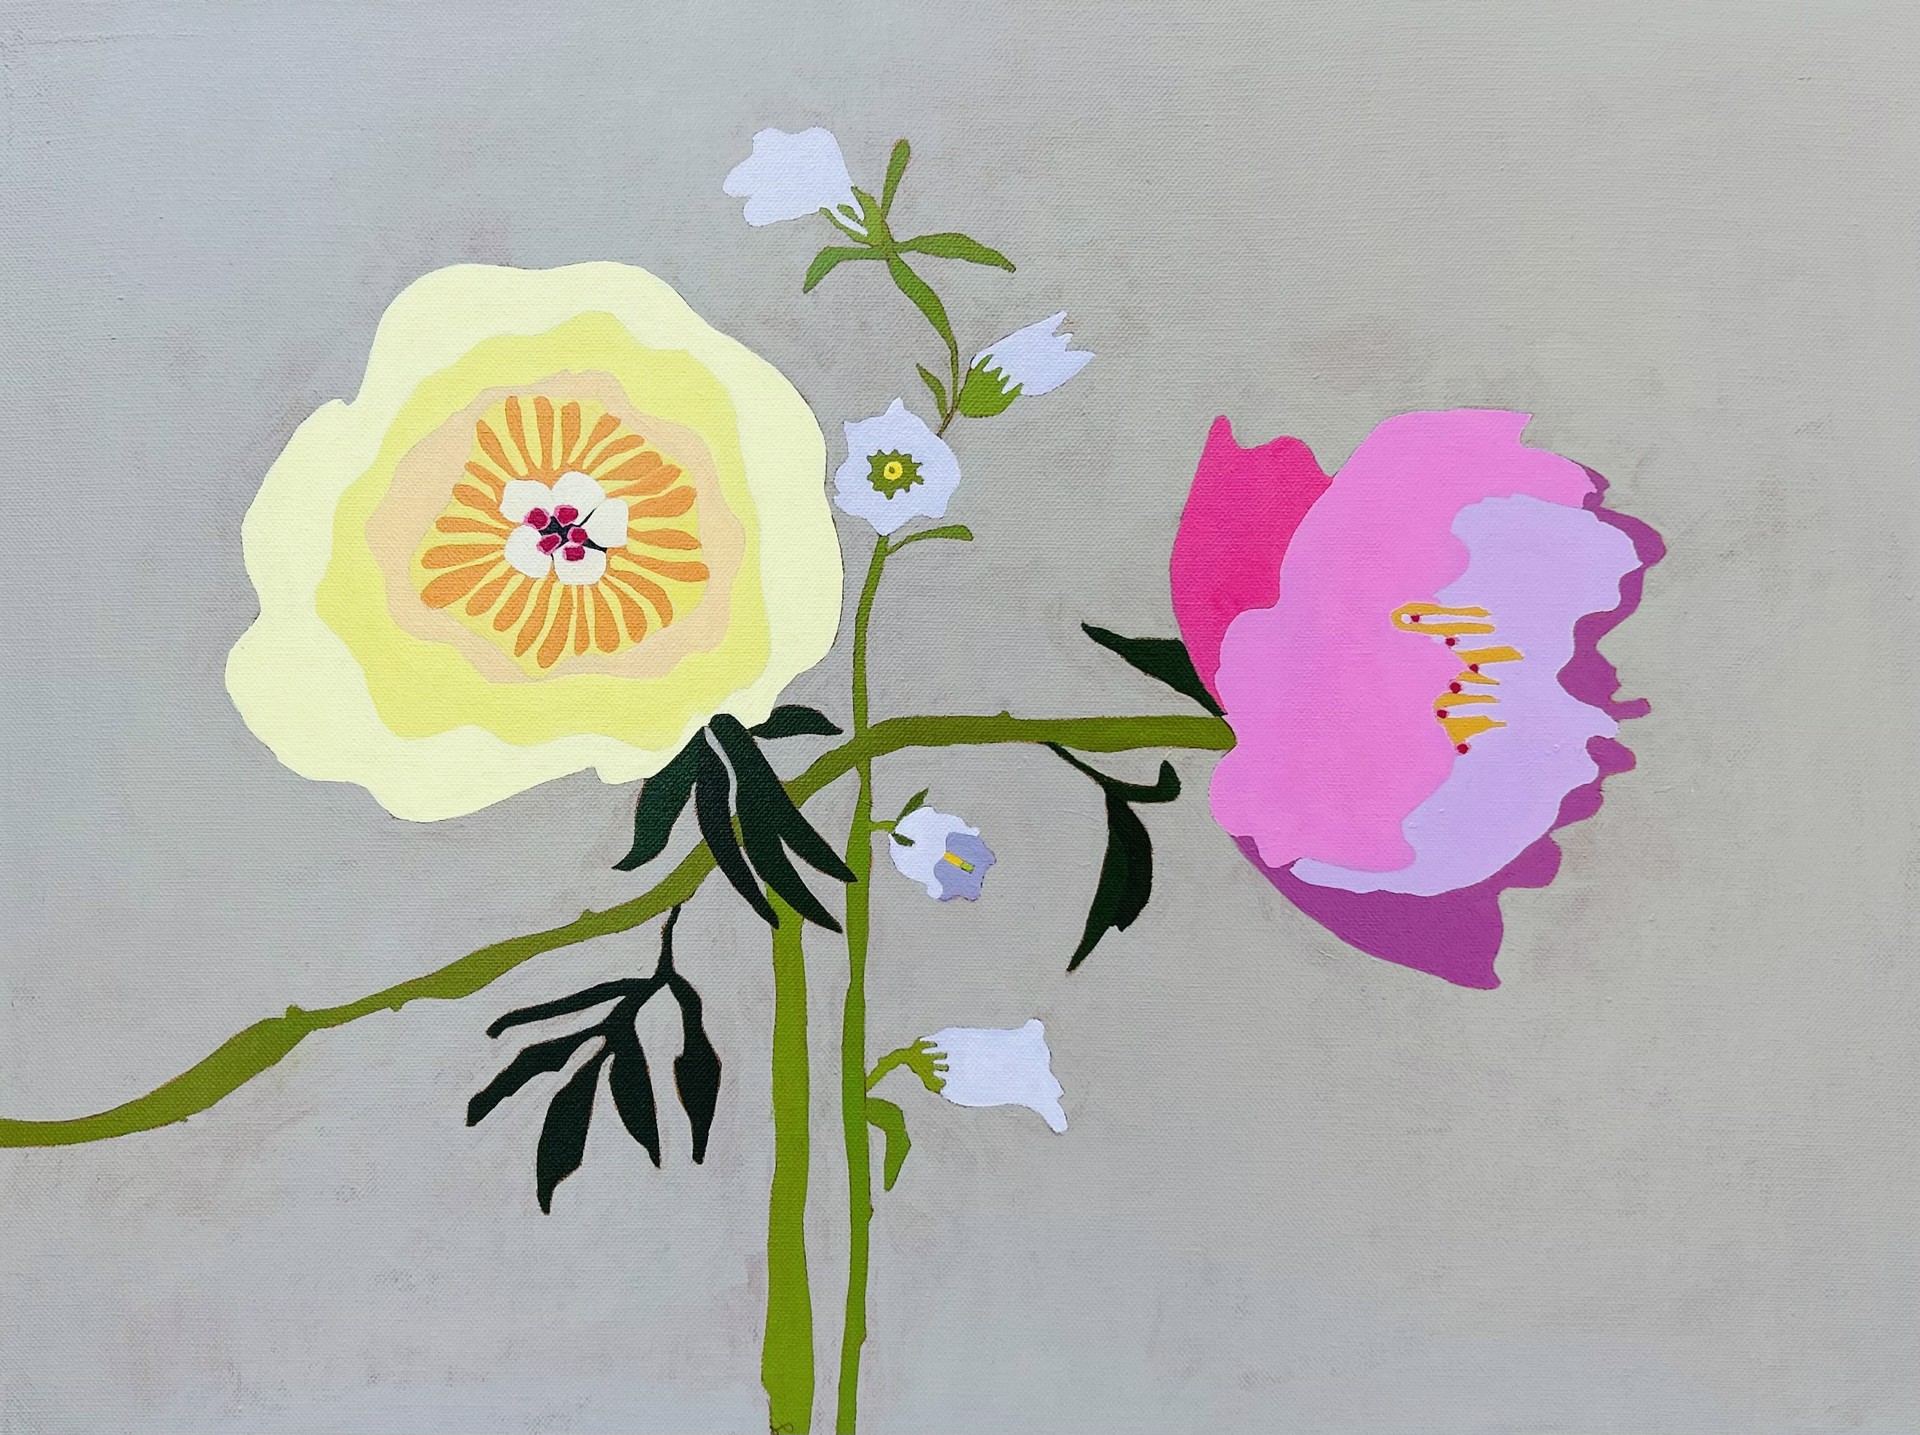 Peonies and Canterbury Bells by Sheila Keefe Ortiz